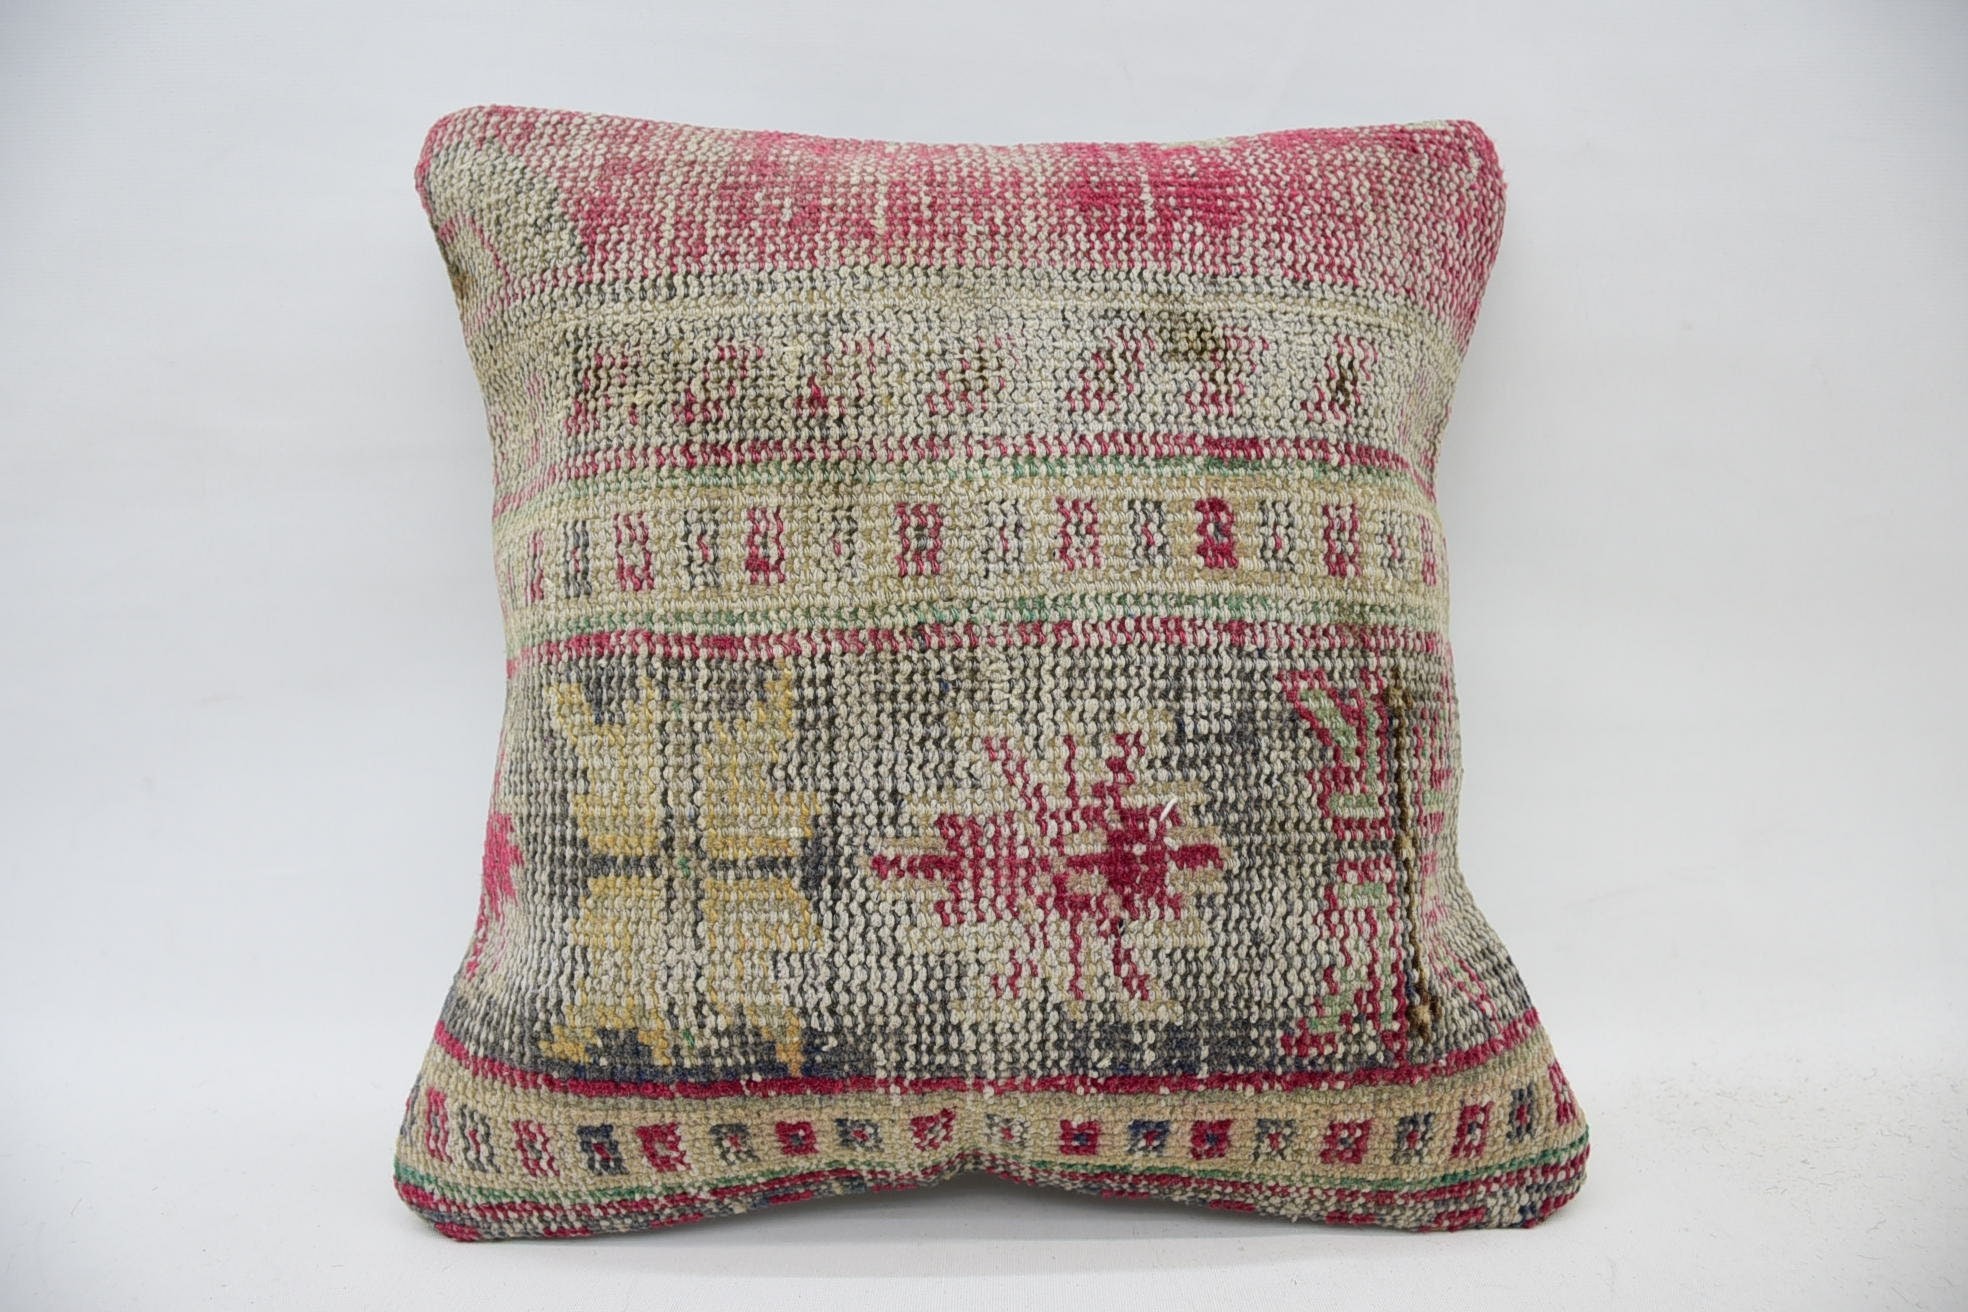 Wool Kilim Pillow Pillow Case, Pillow for Couch, Kilim Pillow Cover, 14"x14" Beige Pillow, Turkish Kilim Pillow, Yoga Pillow Cover